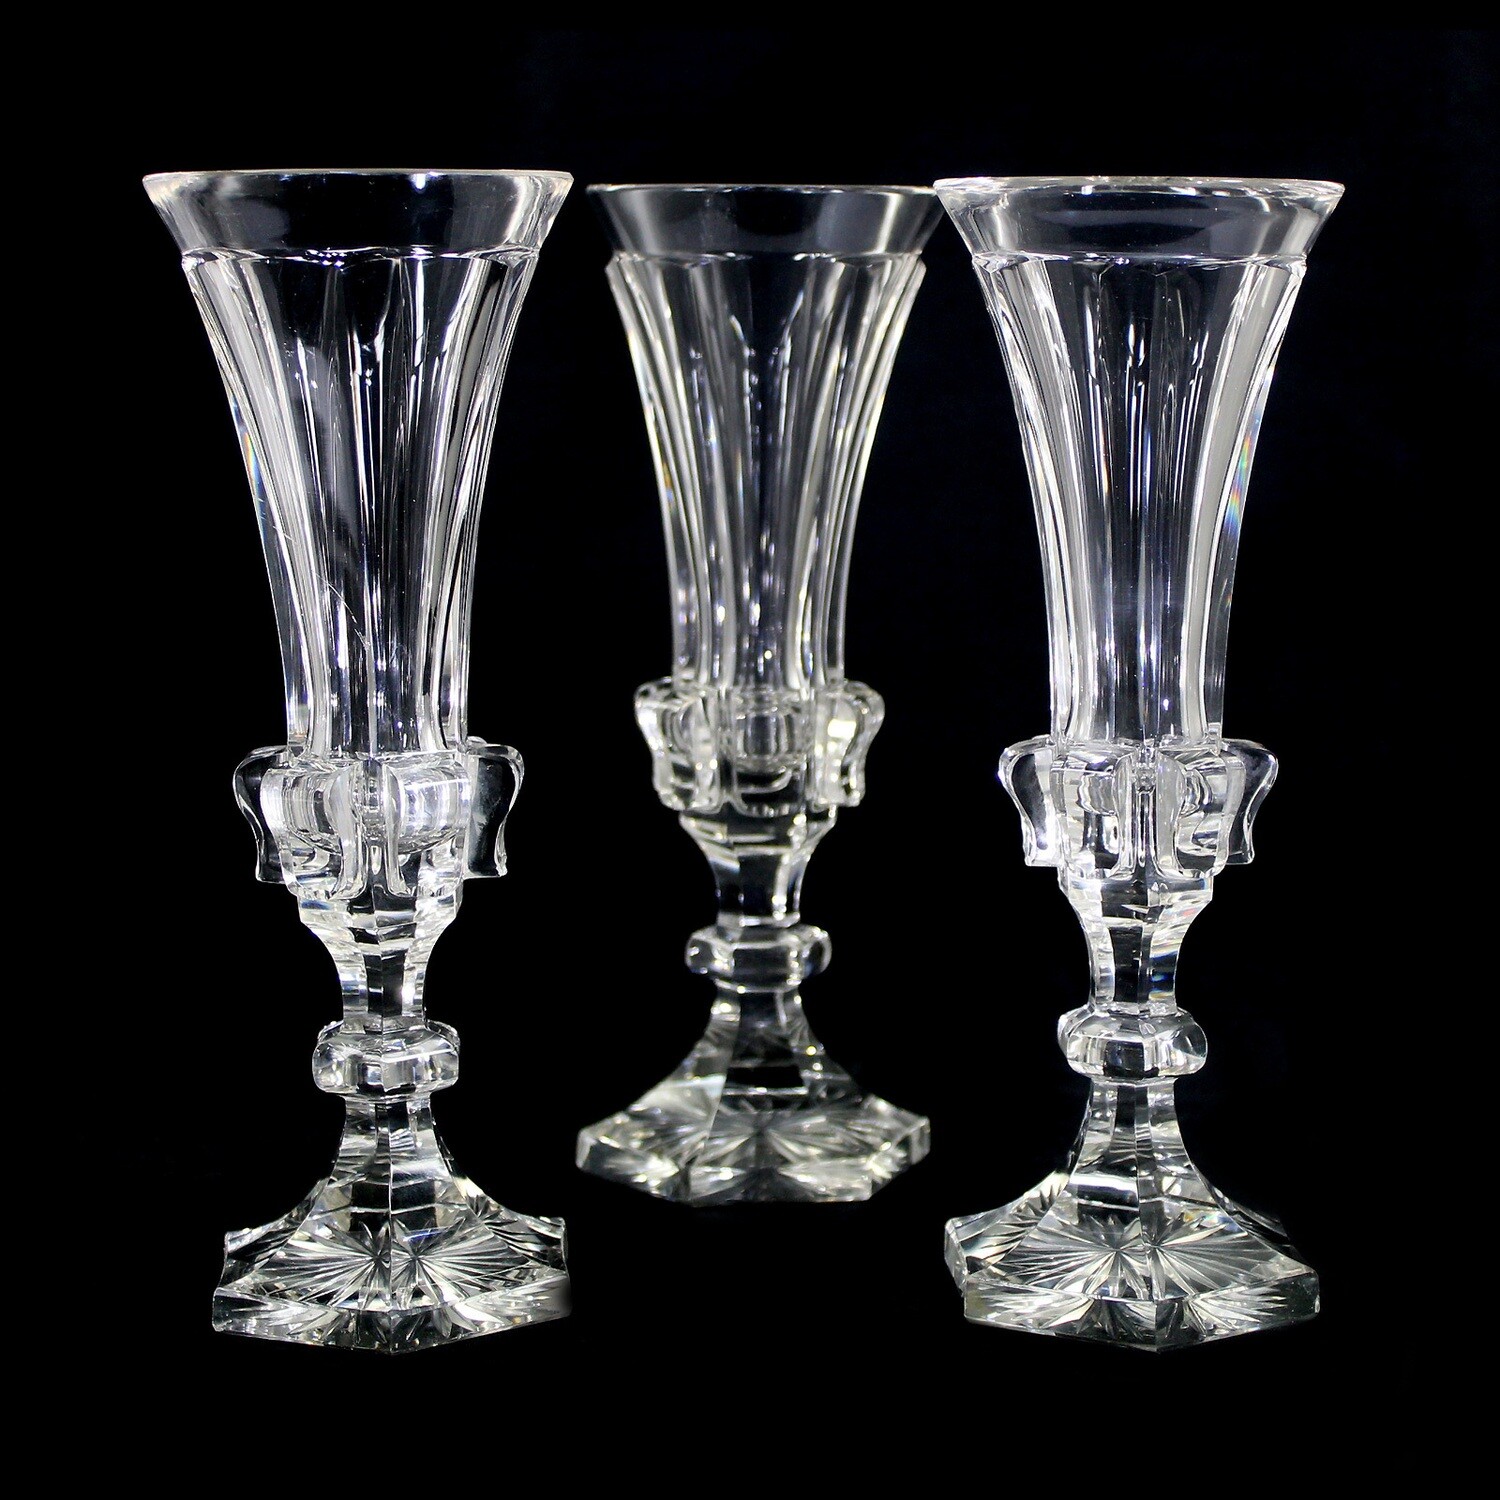 1st of 3. High-quality and rare champagne flute in crystal glass, Theresienthal around 1835-40